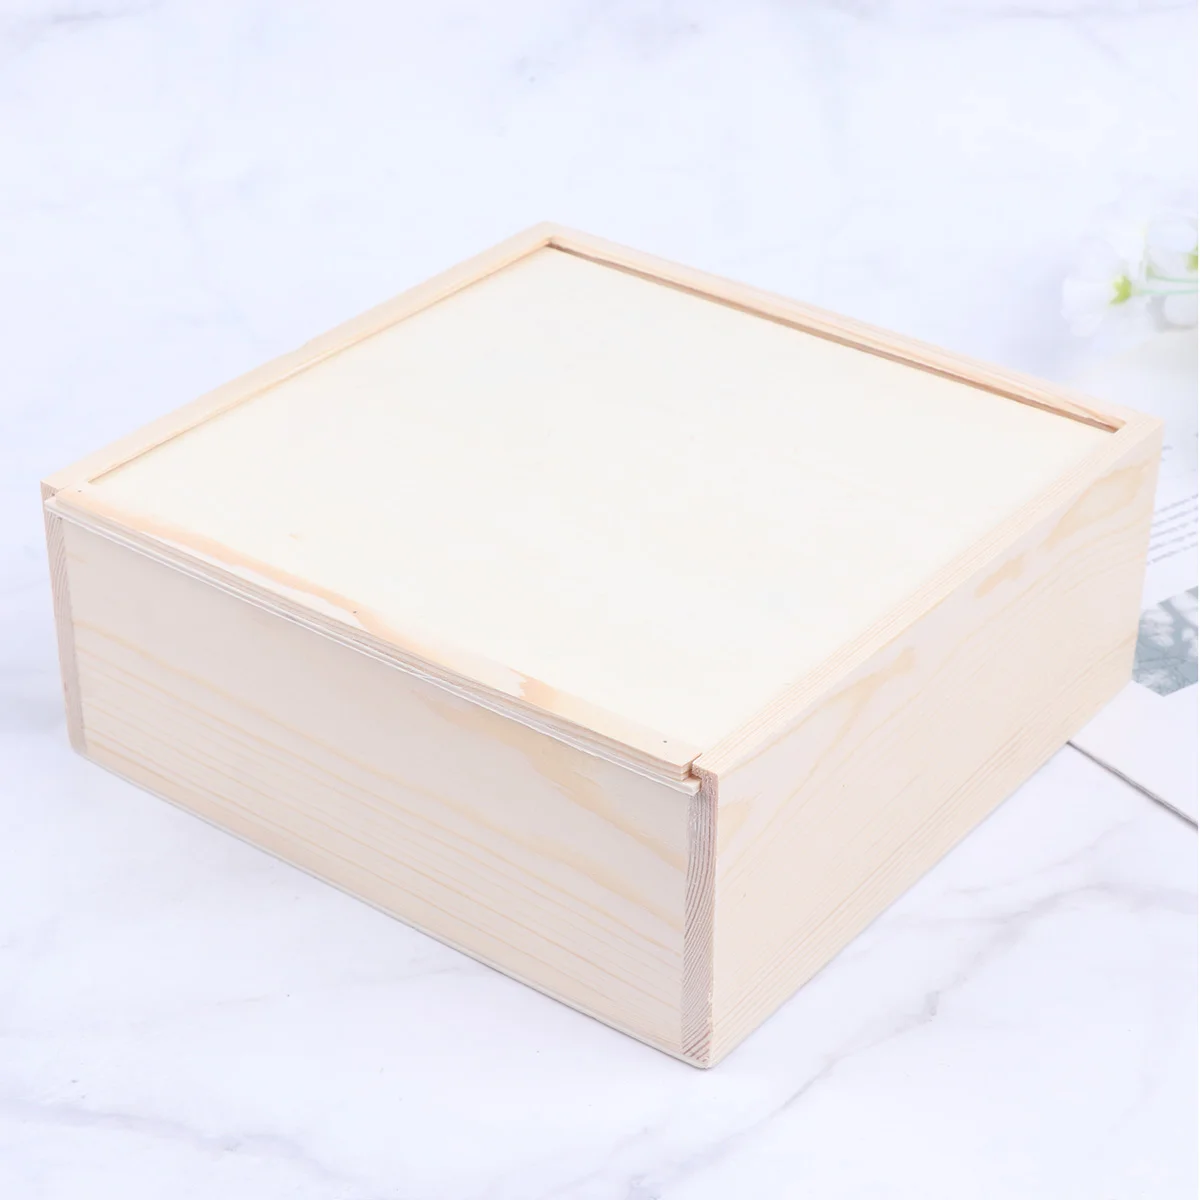 Operitacx Jewelry Organizer Tray Unfinished Pine Wood Box Wooden Gift Box with Push Cover for Hobbies and Home Storage Bracelet